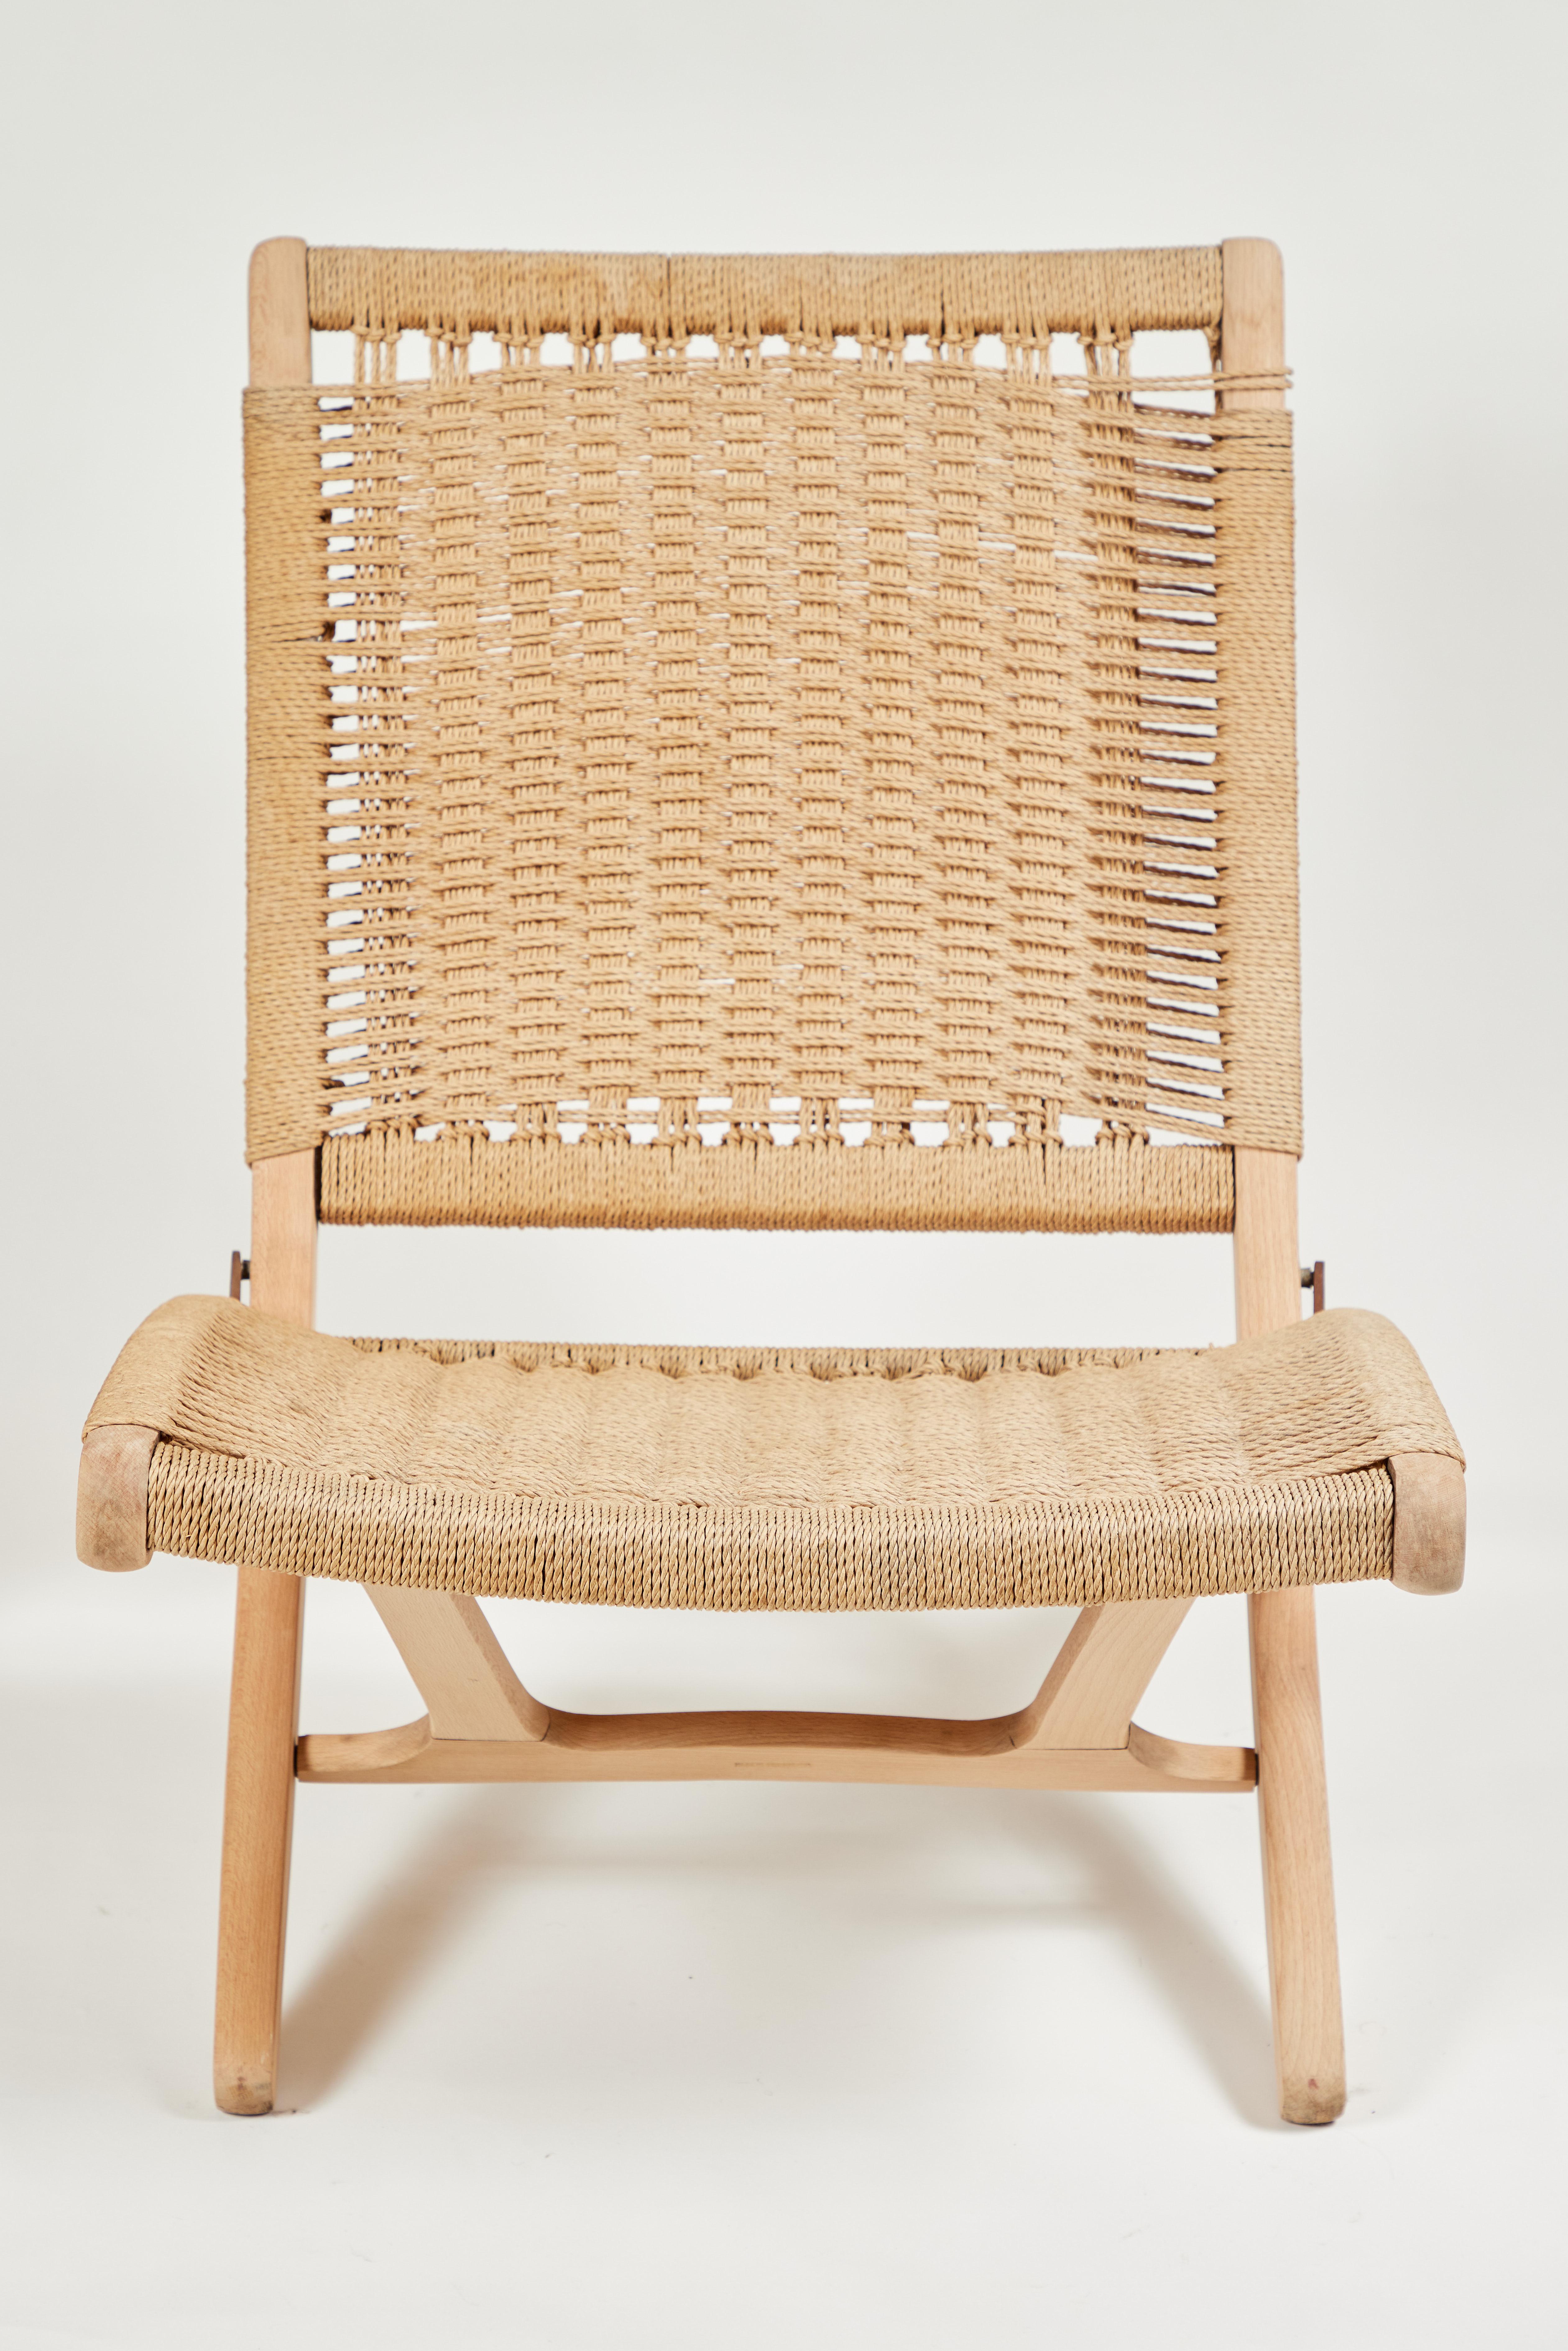 Midcentury Hans Wegner style rush folding chairs, the wood has been sanded to a natural finish. Made in Yugoslavia.